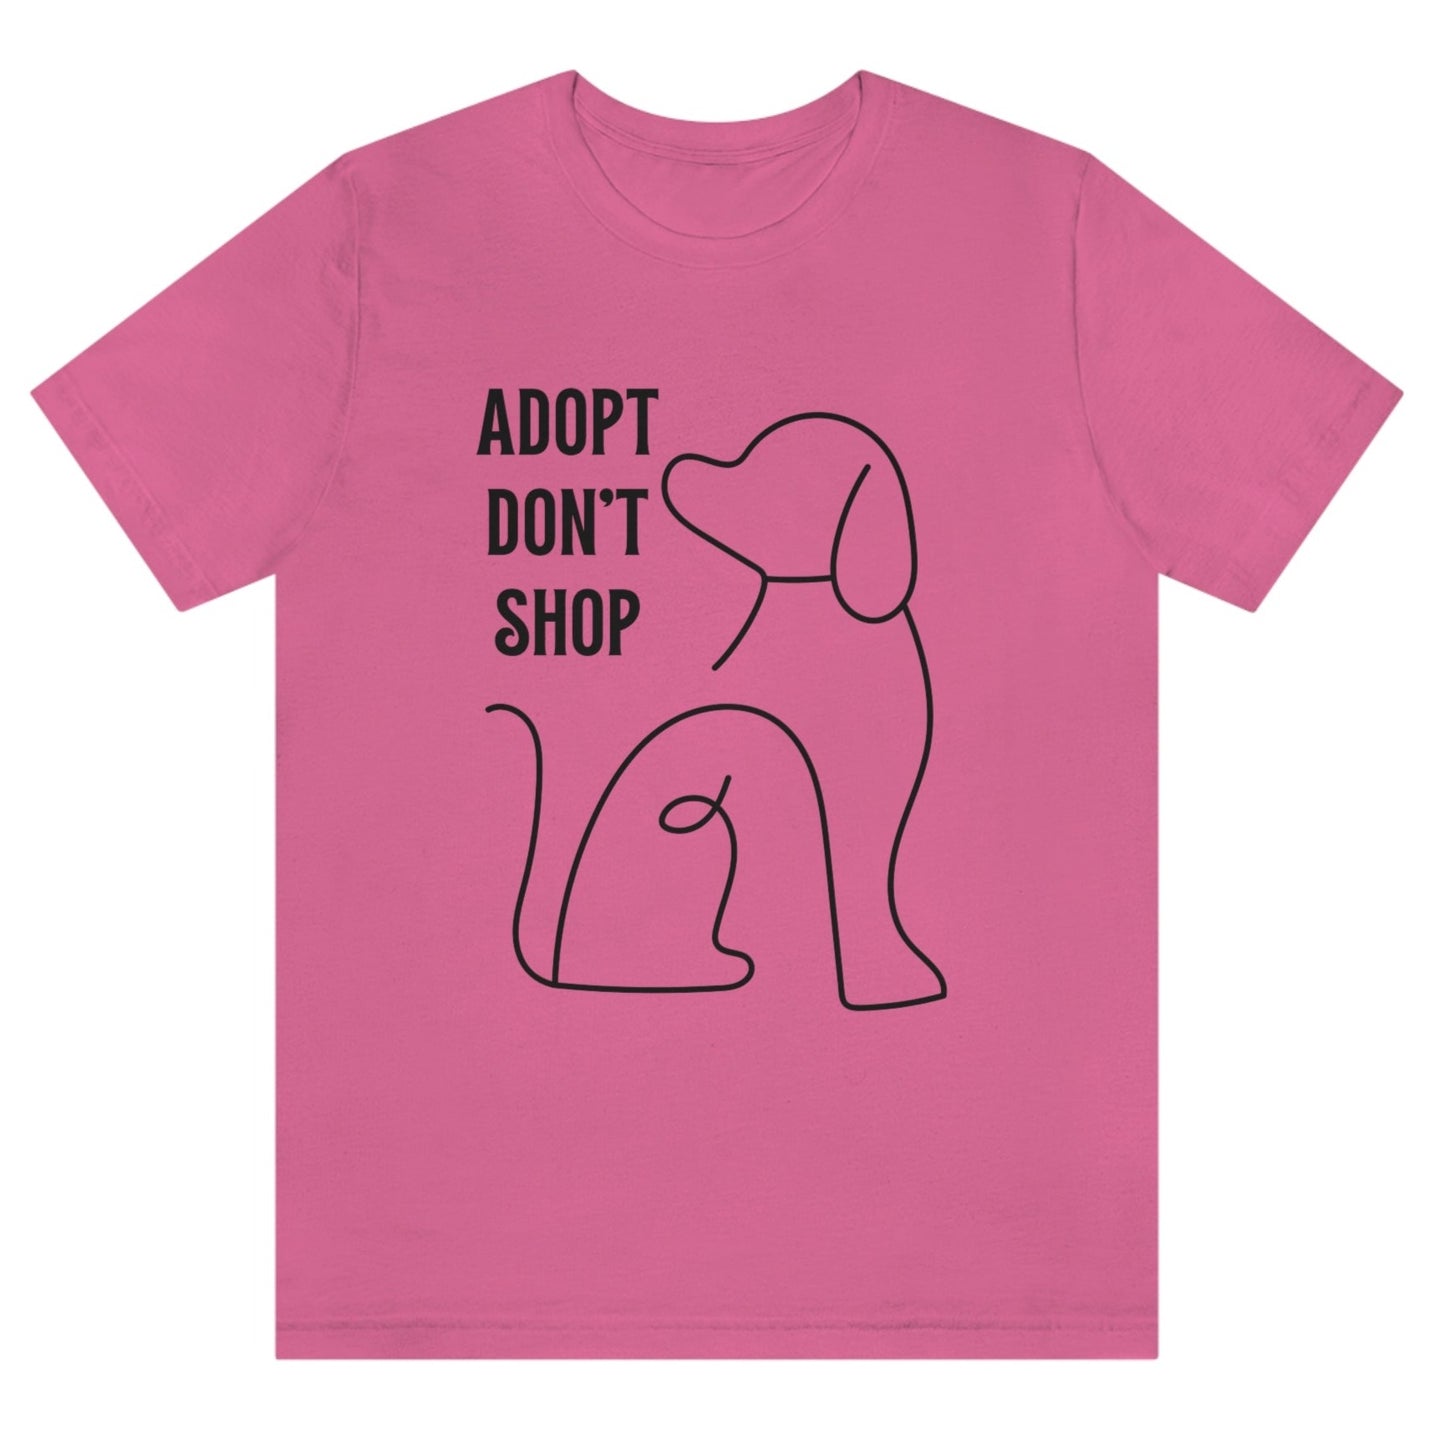 adopt-dont-shop-charity-pink-t-shirt-with-dog-graphic-unisex